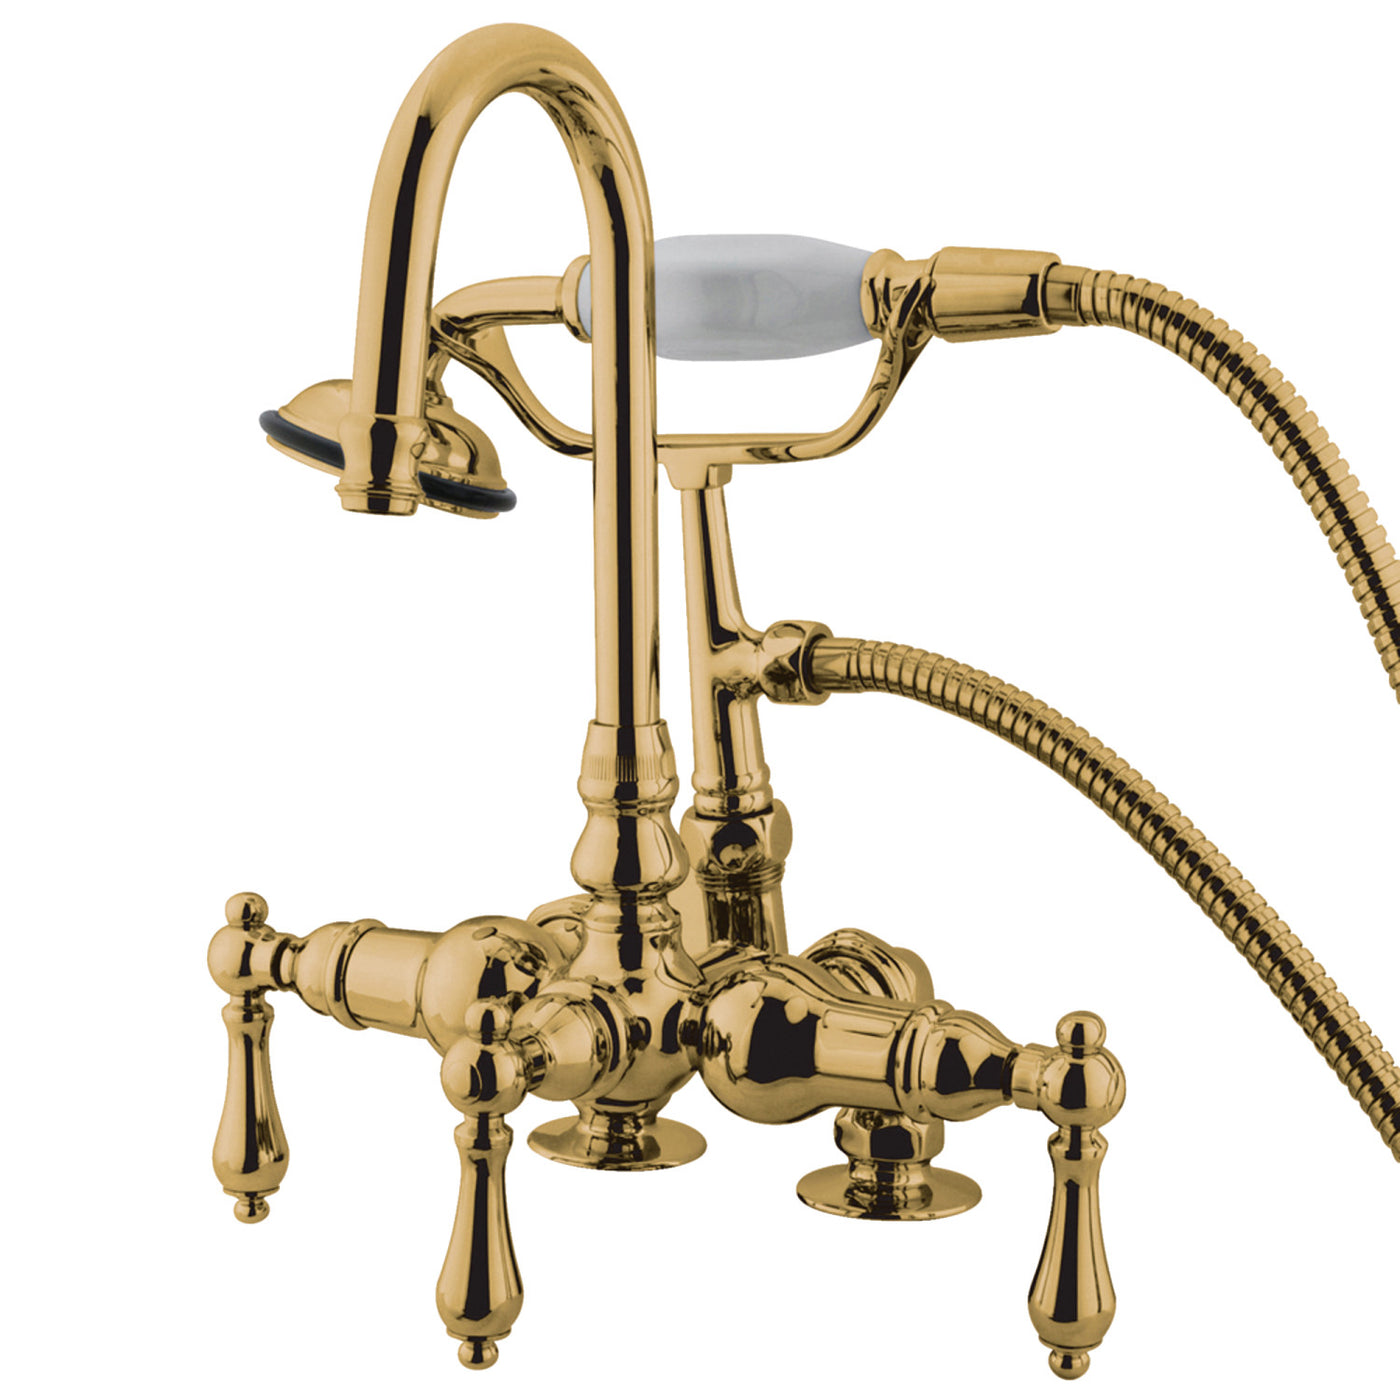 Elements of Design DT0132AL 3-3/8-Inch Deck Mount Tub Faucet with Hand Shower, Polished Brass